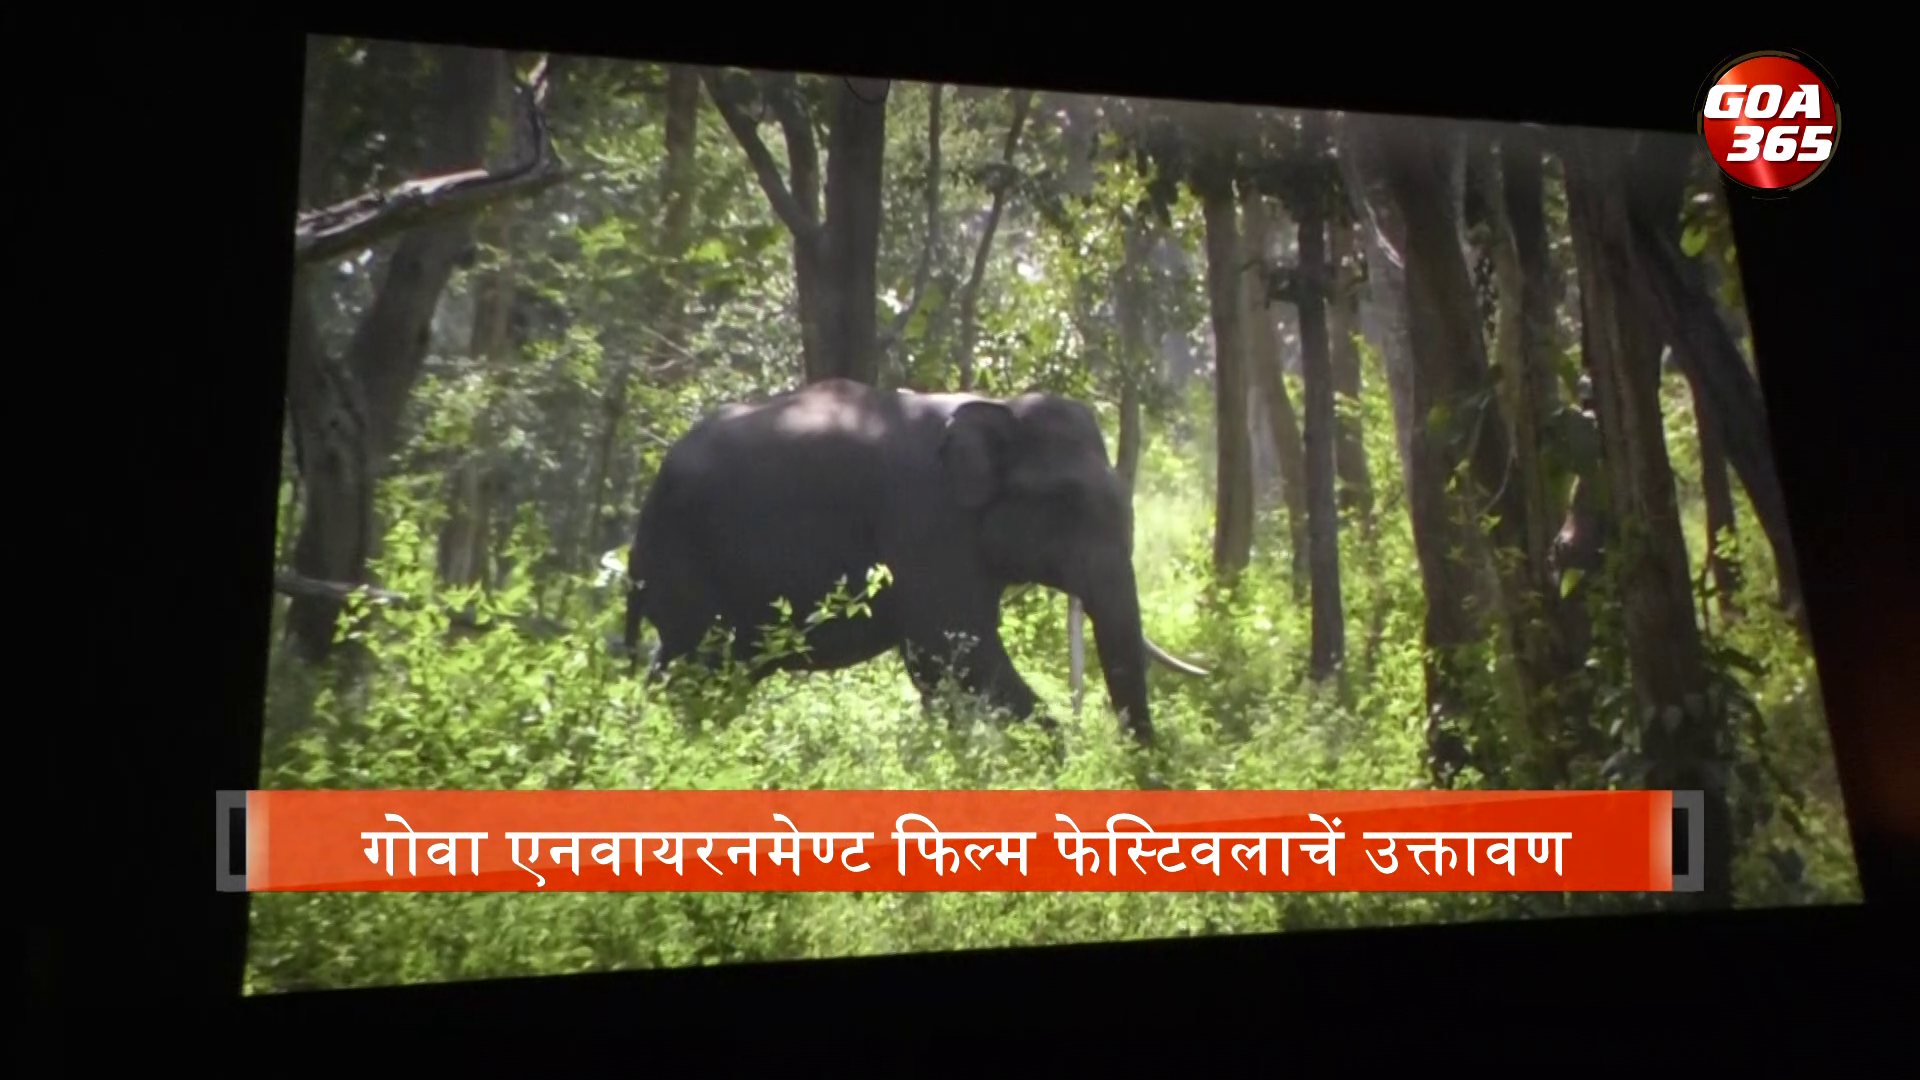 ‘The Elephant Whisperers’ screened at inauguration of first Environmental Film Festival